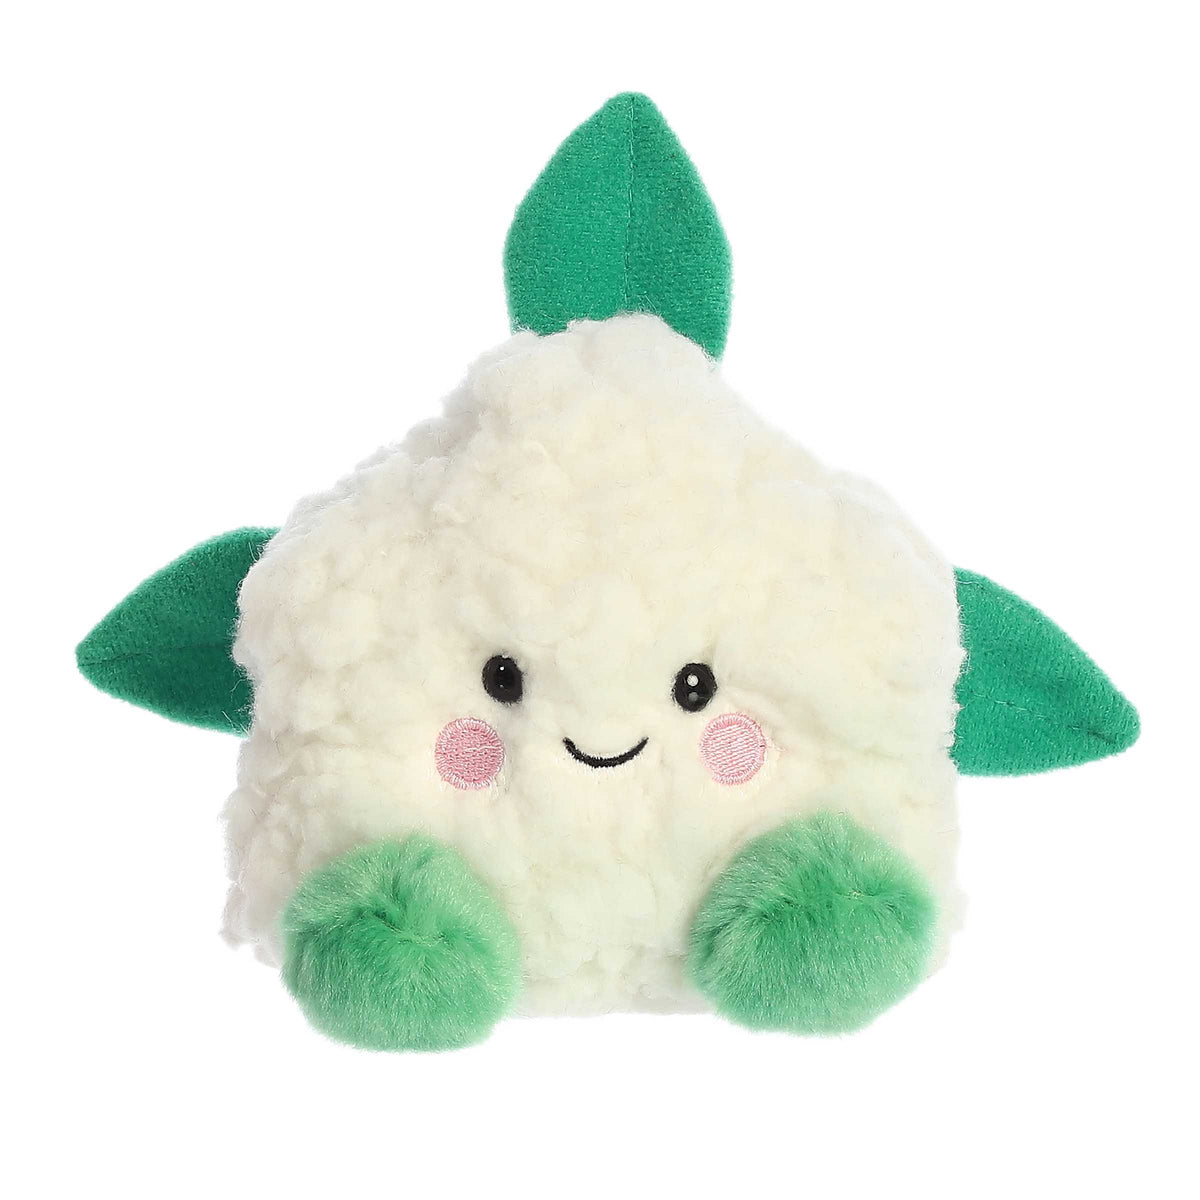 A fluffy white cauliflower plush resembling the vegetable, with green leaves and feet, an adorable smile, and pink blush